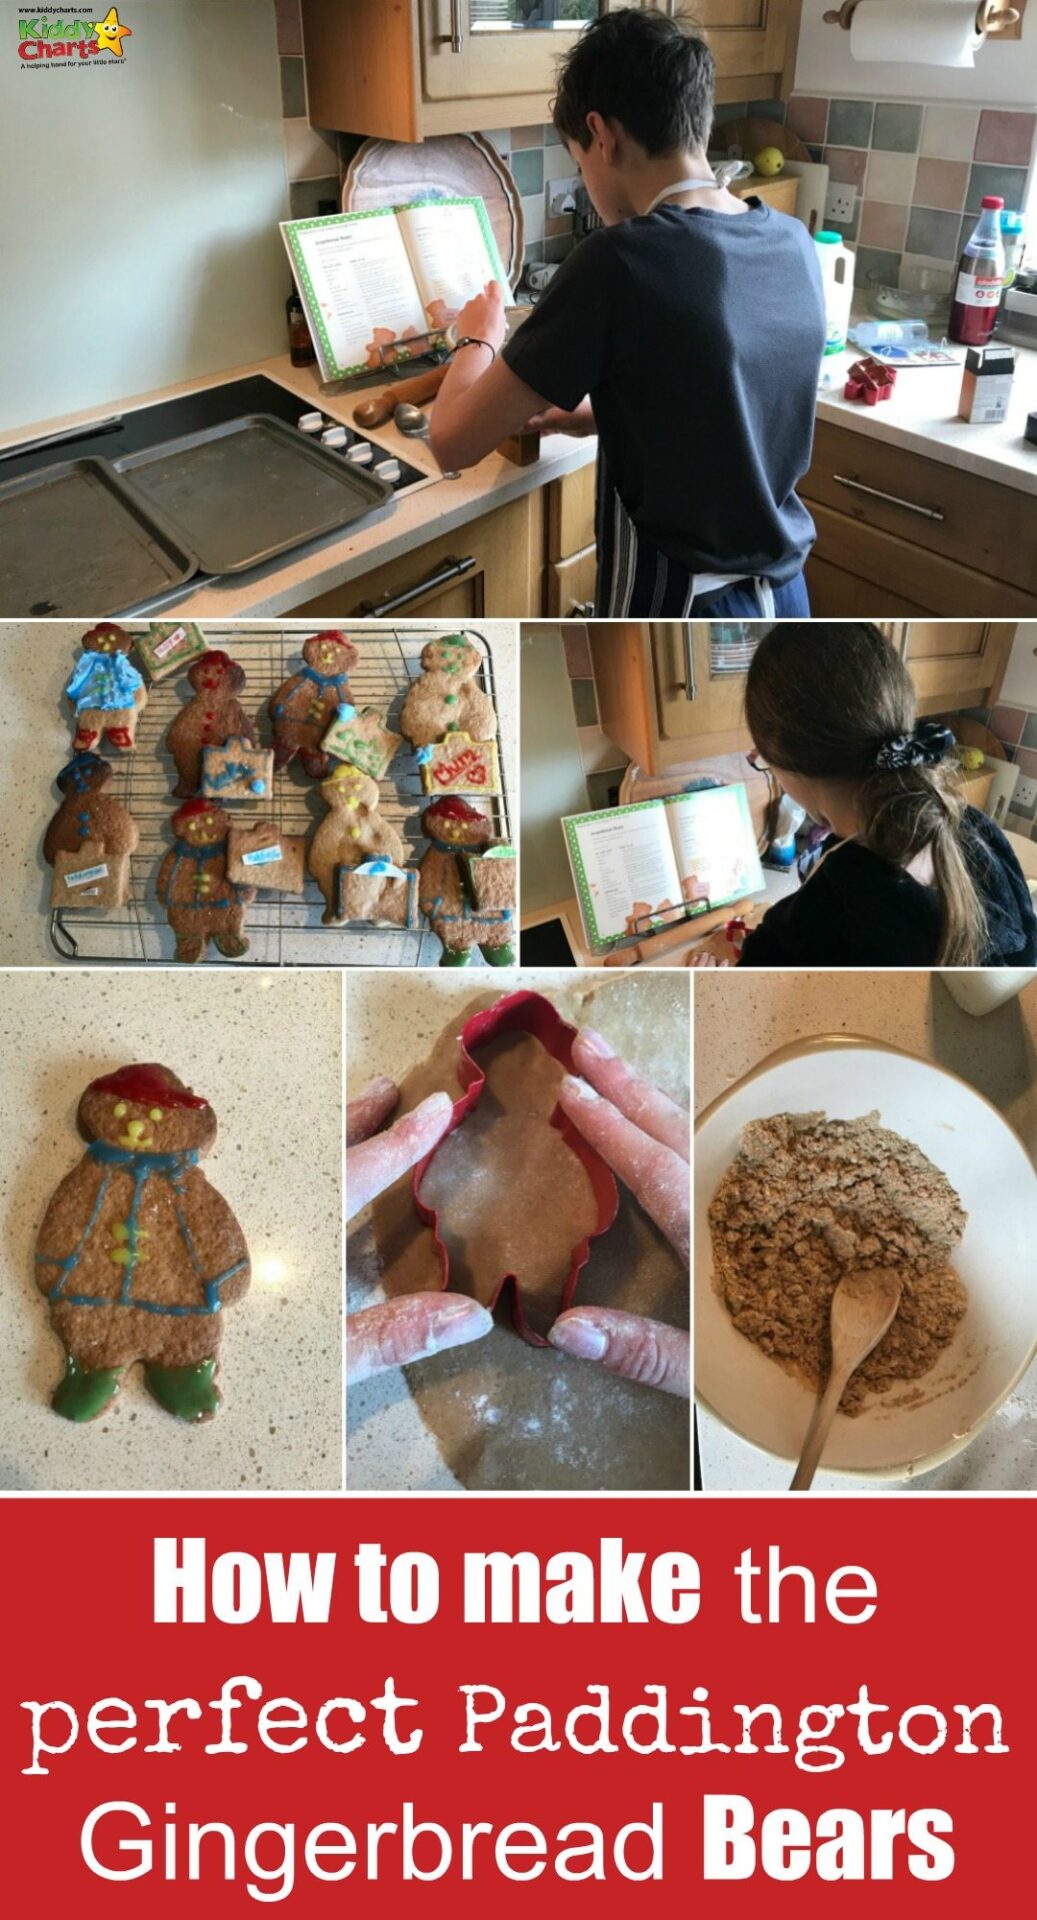 Do your kids love Paddington Bear - in which case they will LOVE this Gingerbread bears - so easy to make; in fact this 12 year old did?!? #Paddington2 #biscuits #cookingwithkids #gingerbread